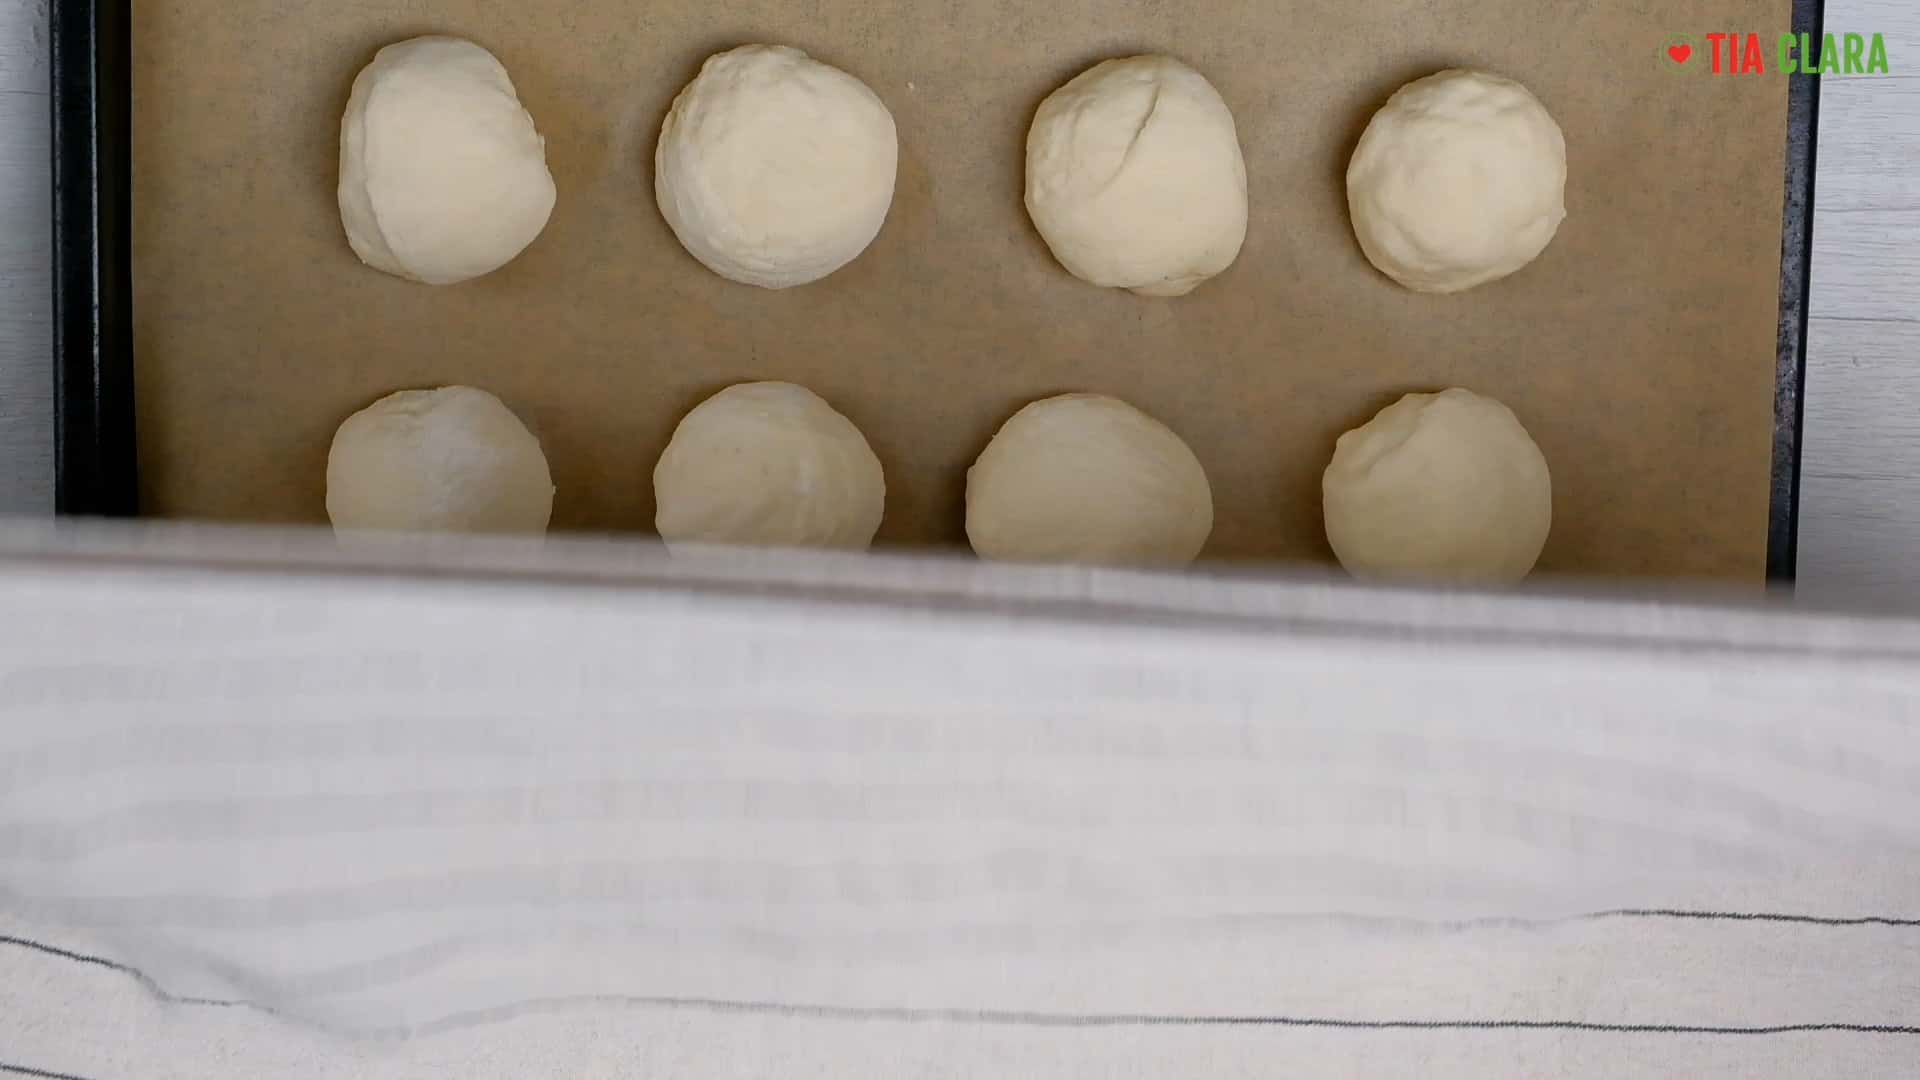 Covering the bread rolls.